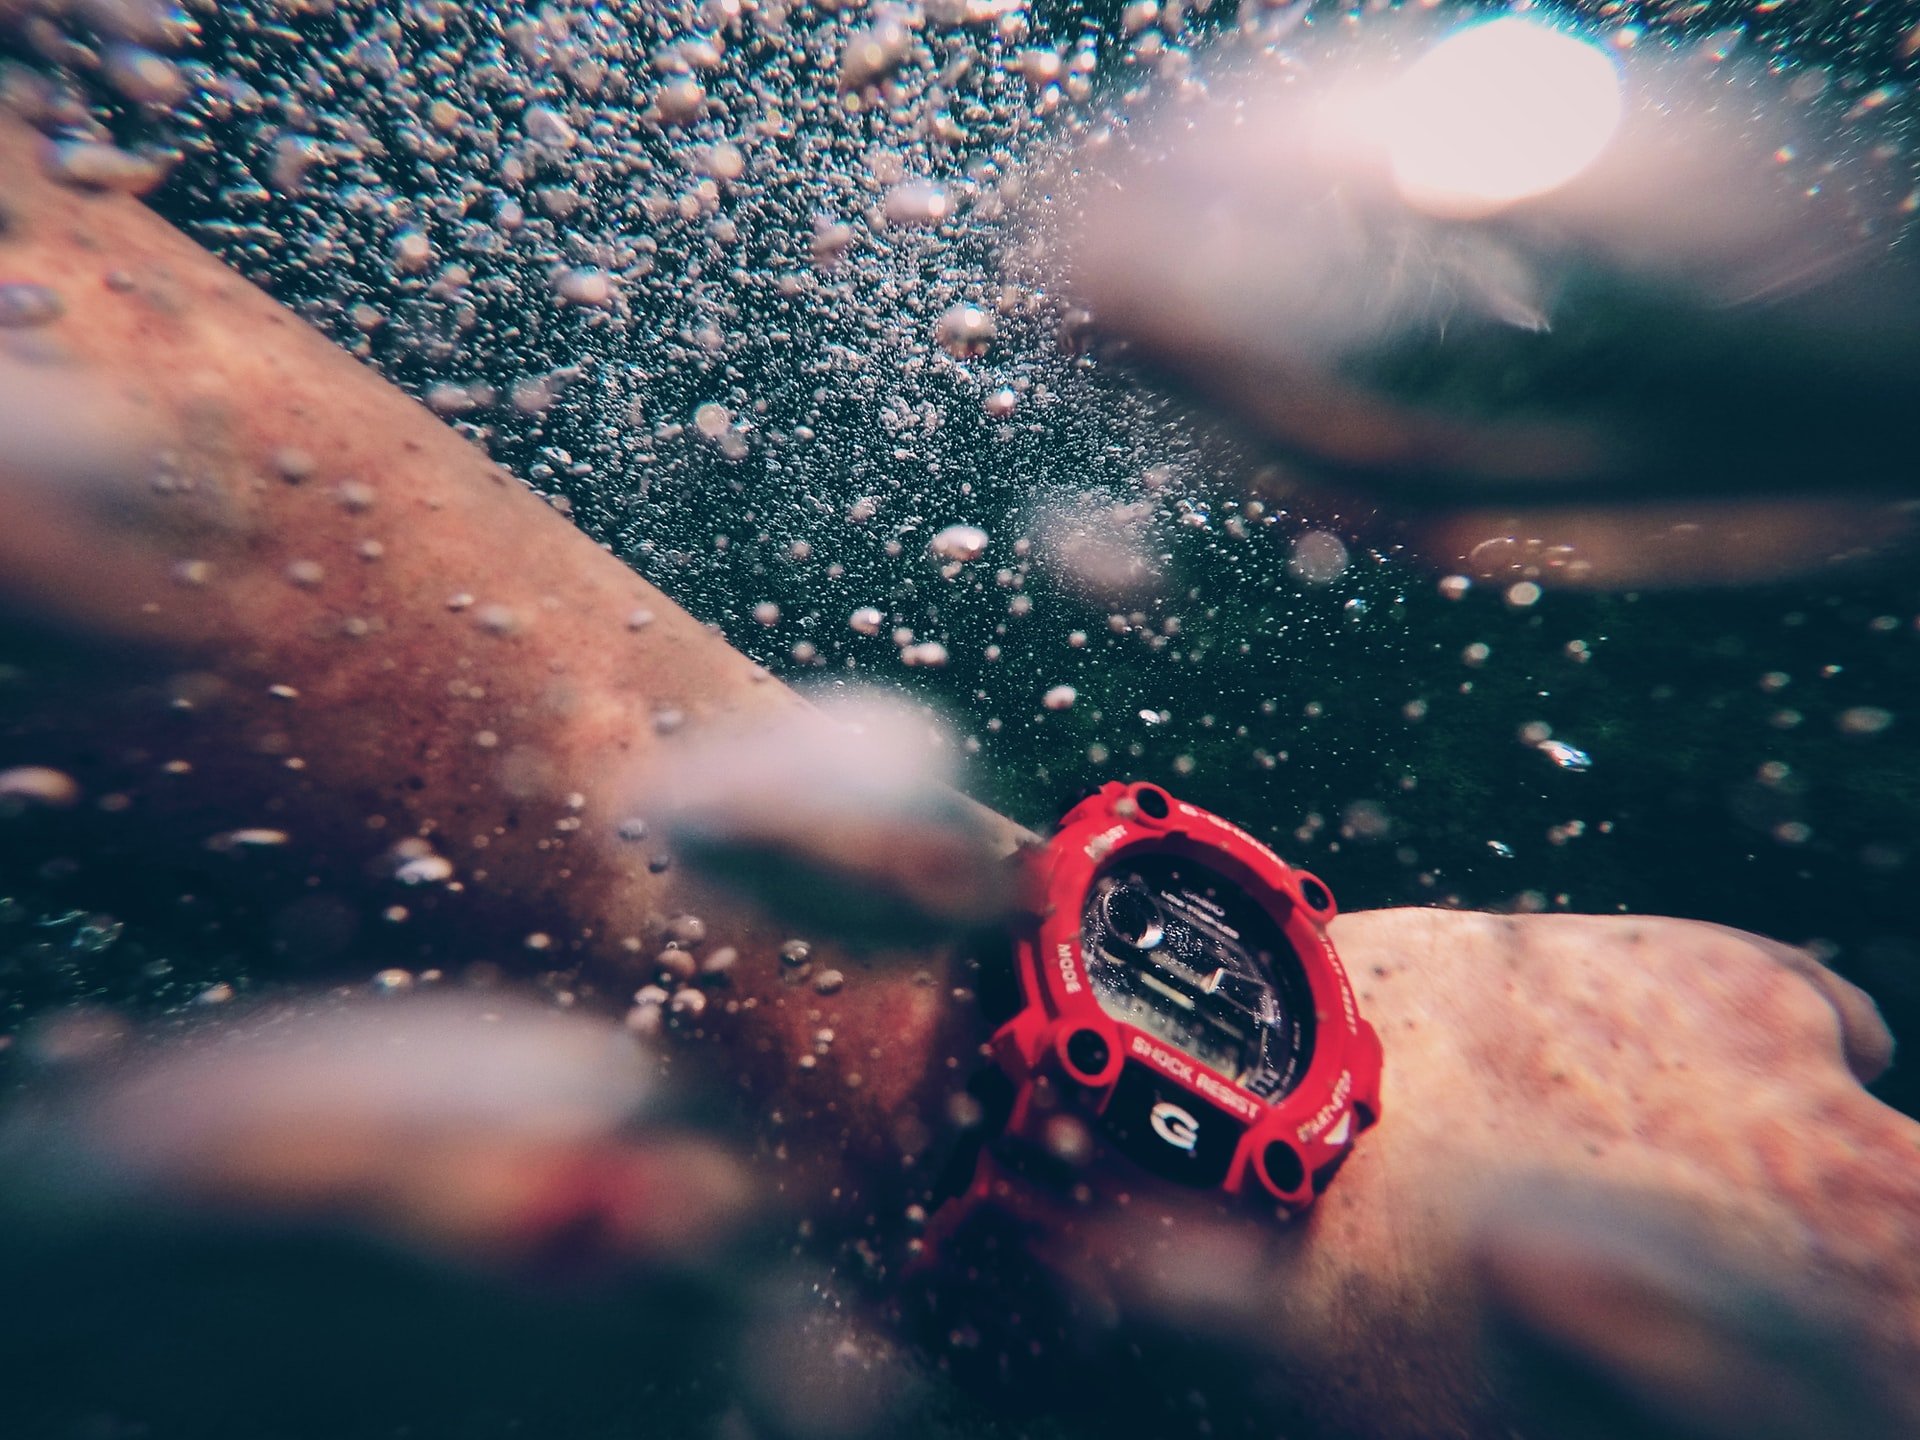 https://www.firstclasswatches.co.uk/blog/wp-content/uploads/2021/06/timo-wagner-sNhlLoW5pAY-unsplash.jpg